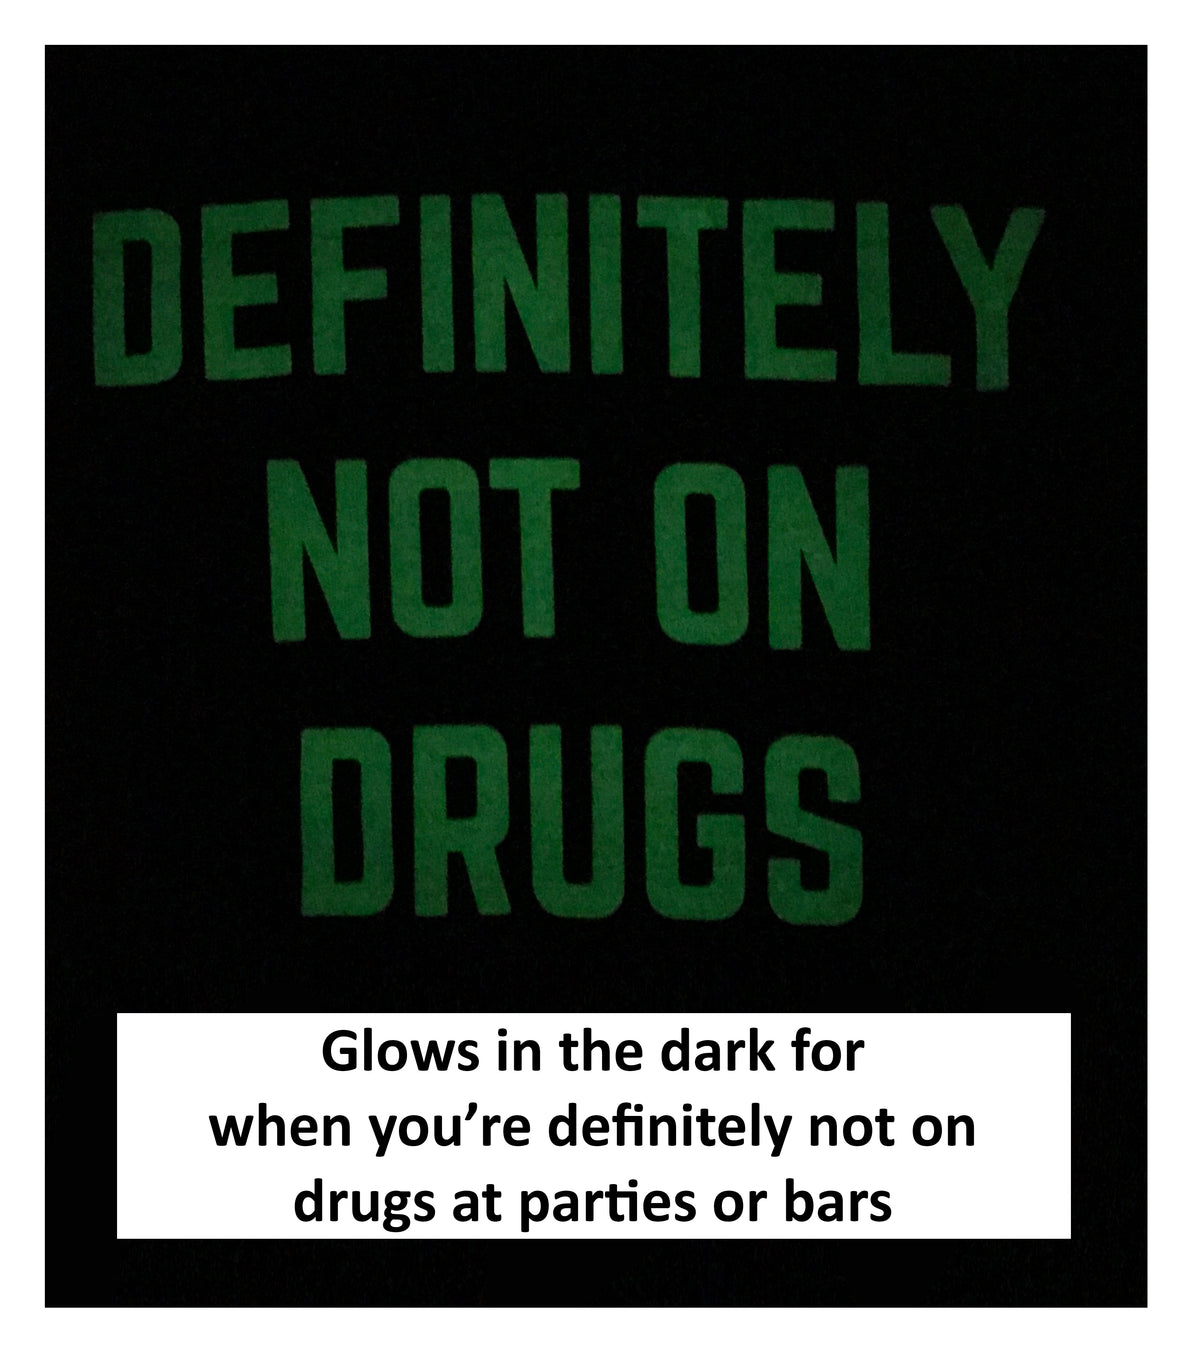 Definitely Not on Drugs | Funny Party, Rave, Festival Club Glow in Dark T-shirt